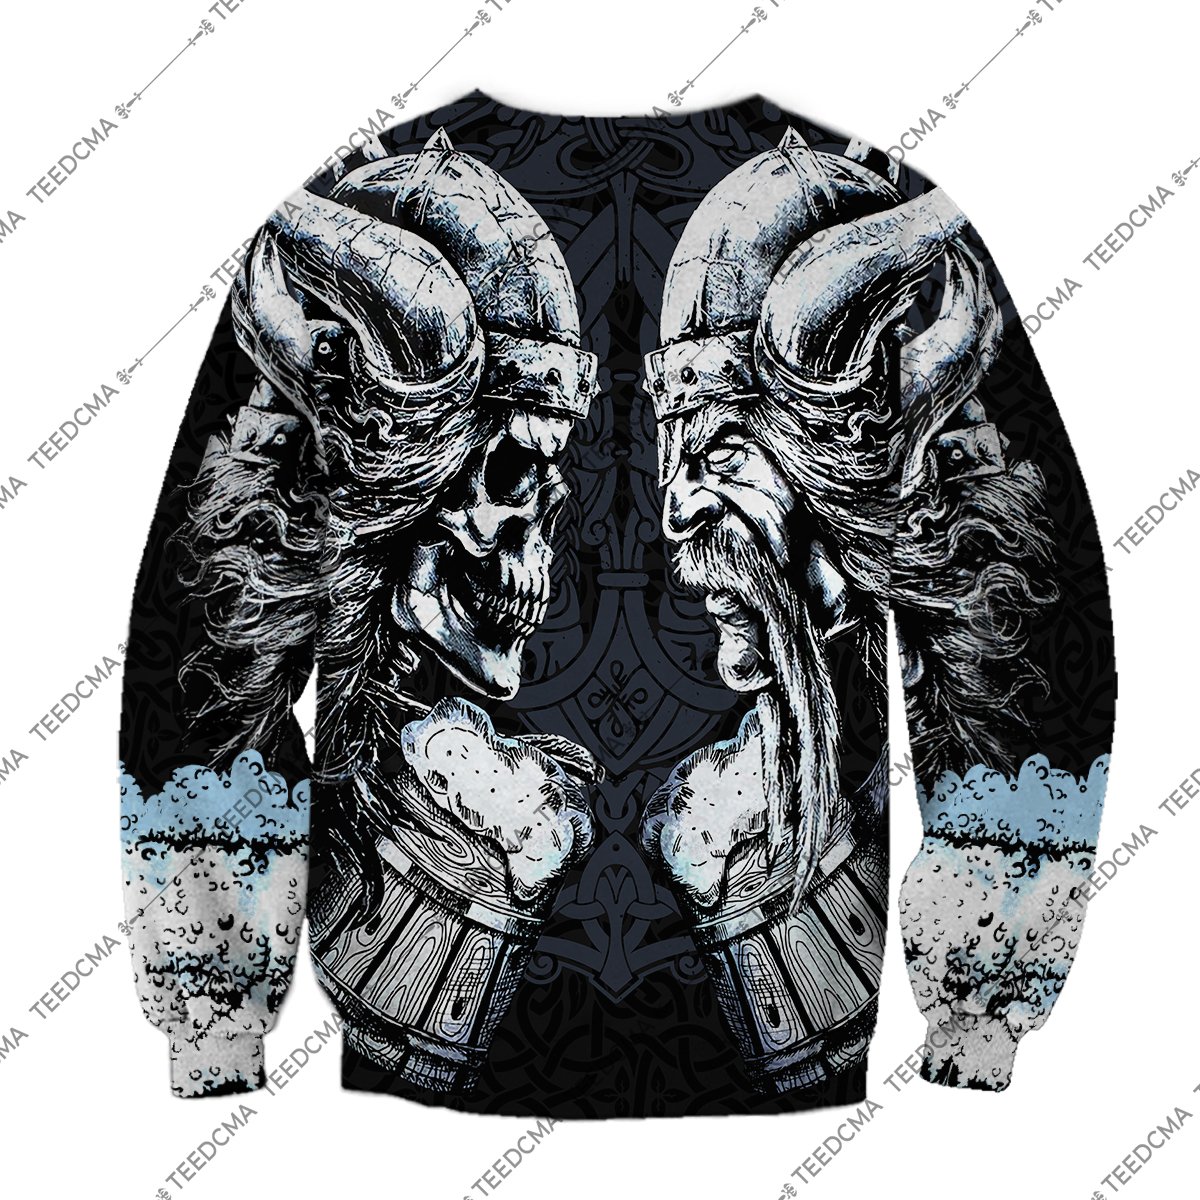 the skull and warrior viking all over printed sweatshirt - back